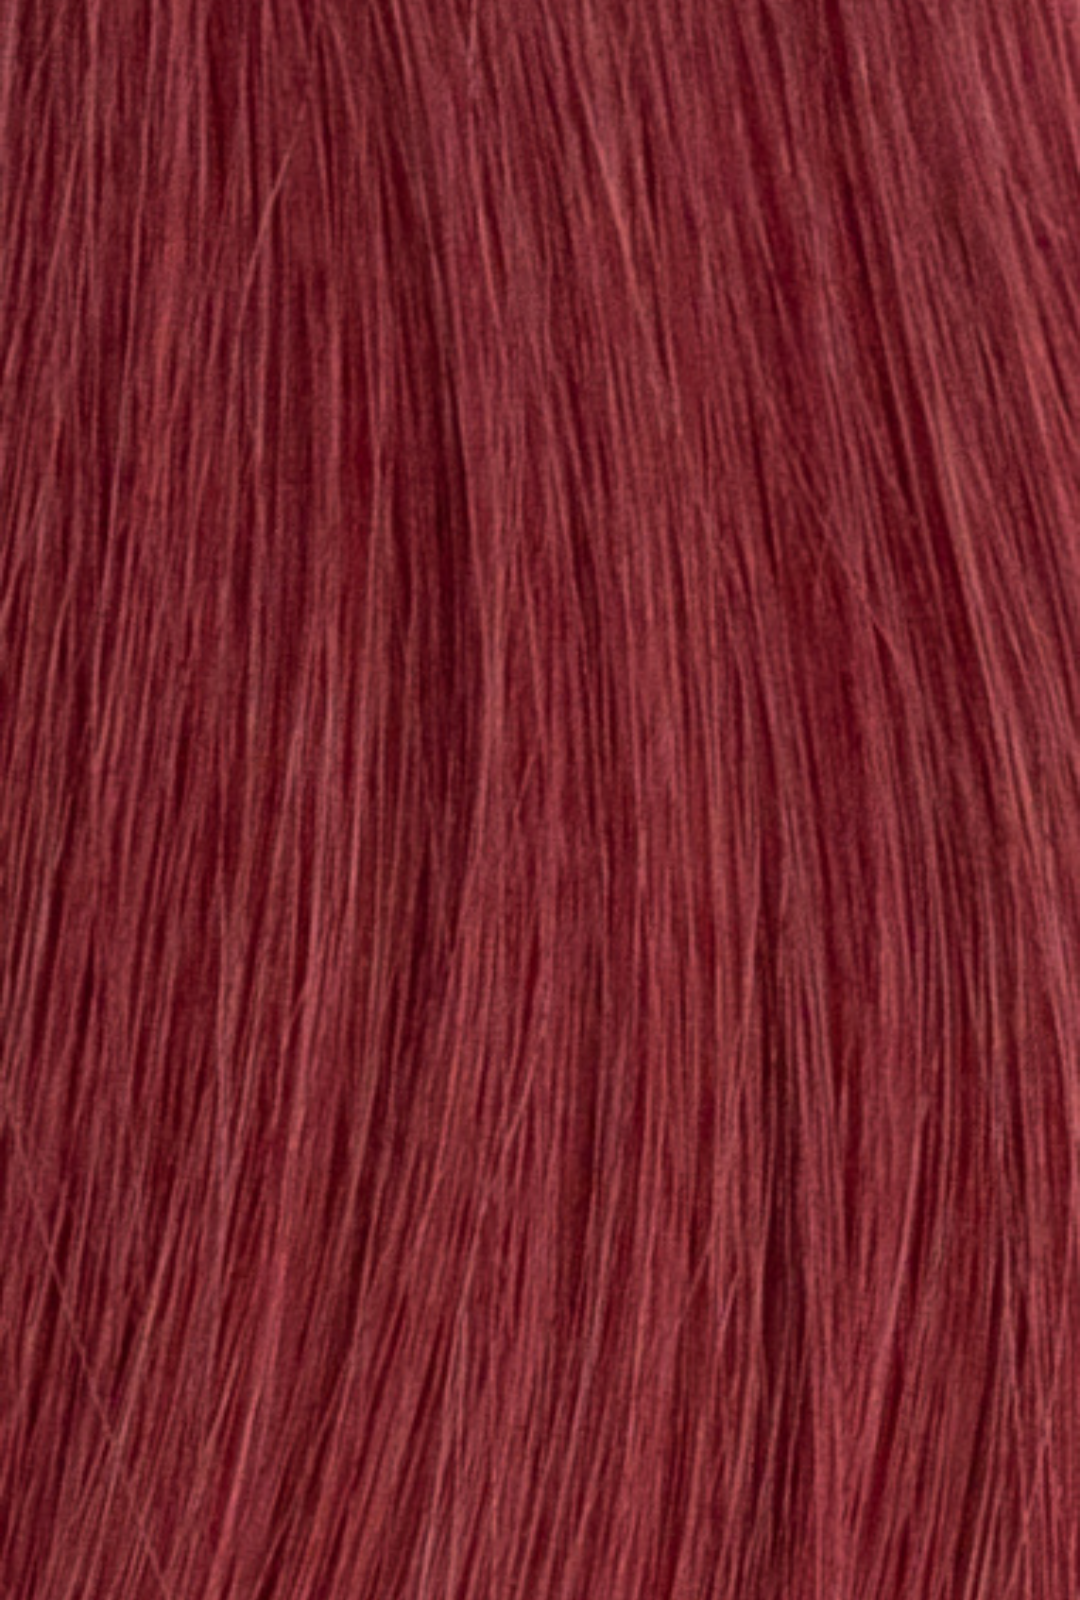 Keratin Bond Ruby Red - Discontinued